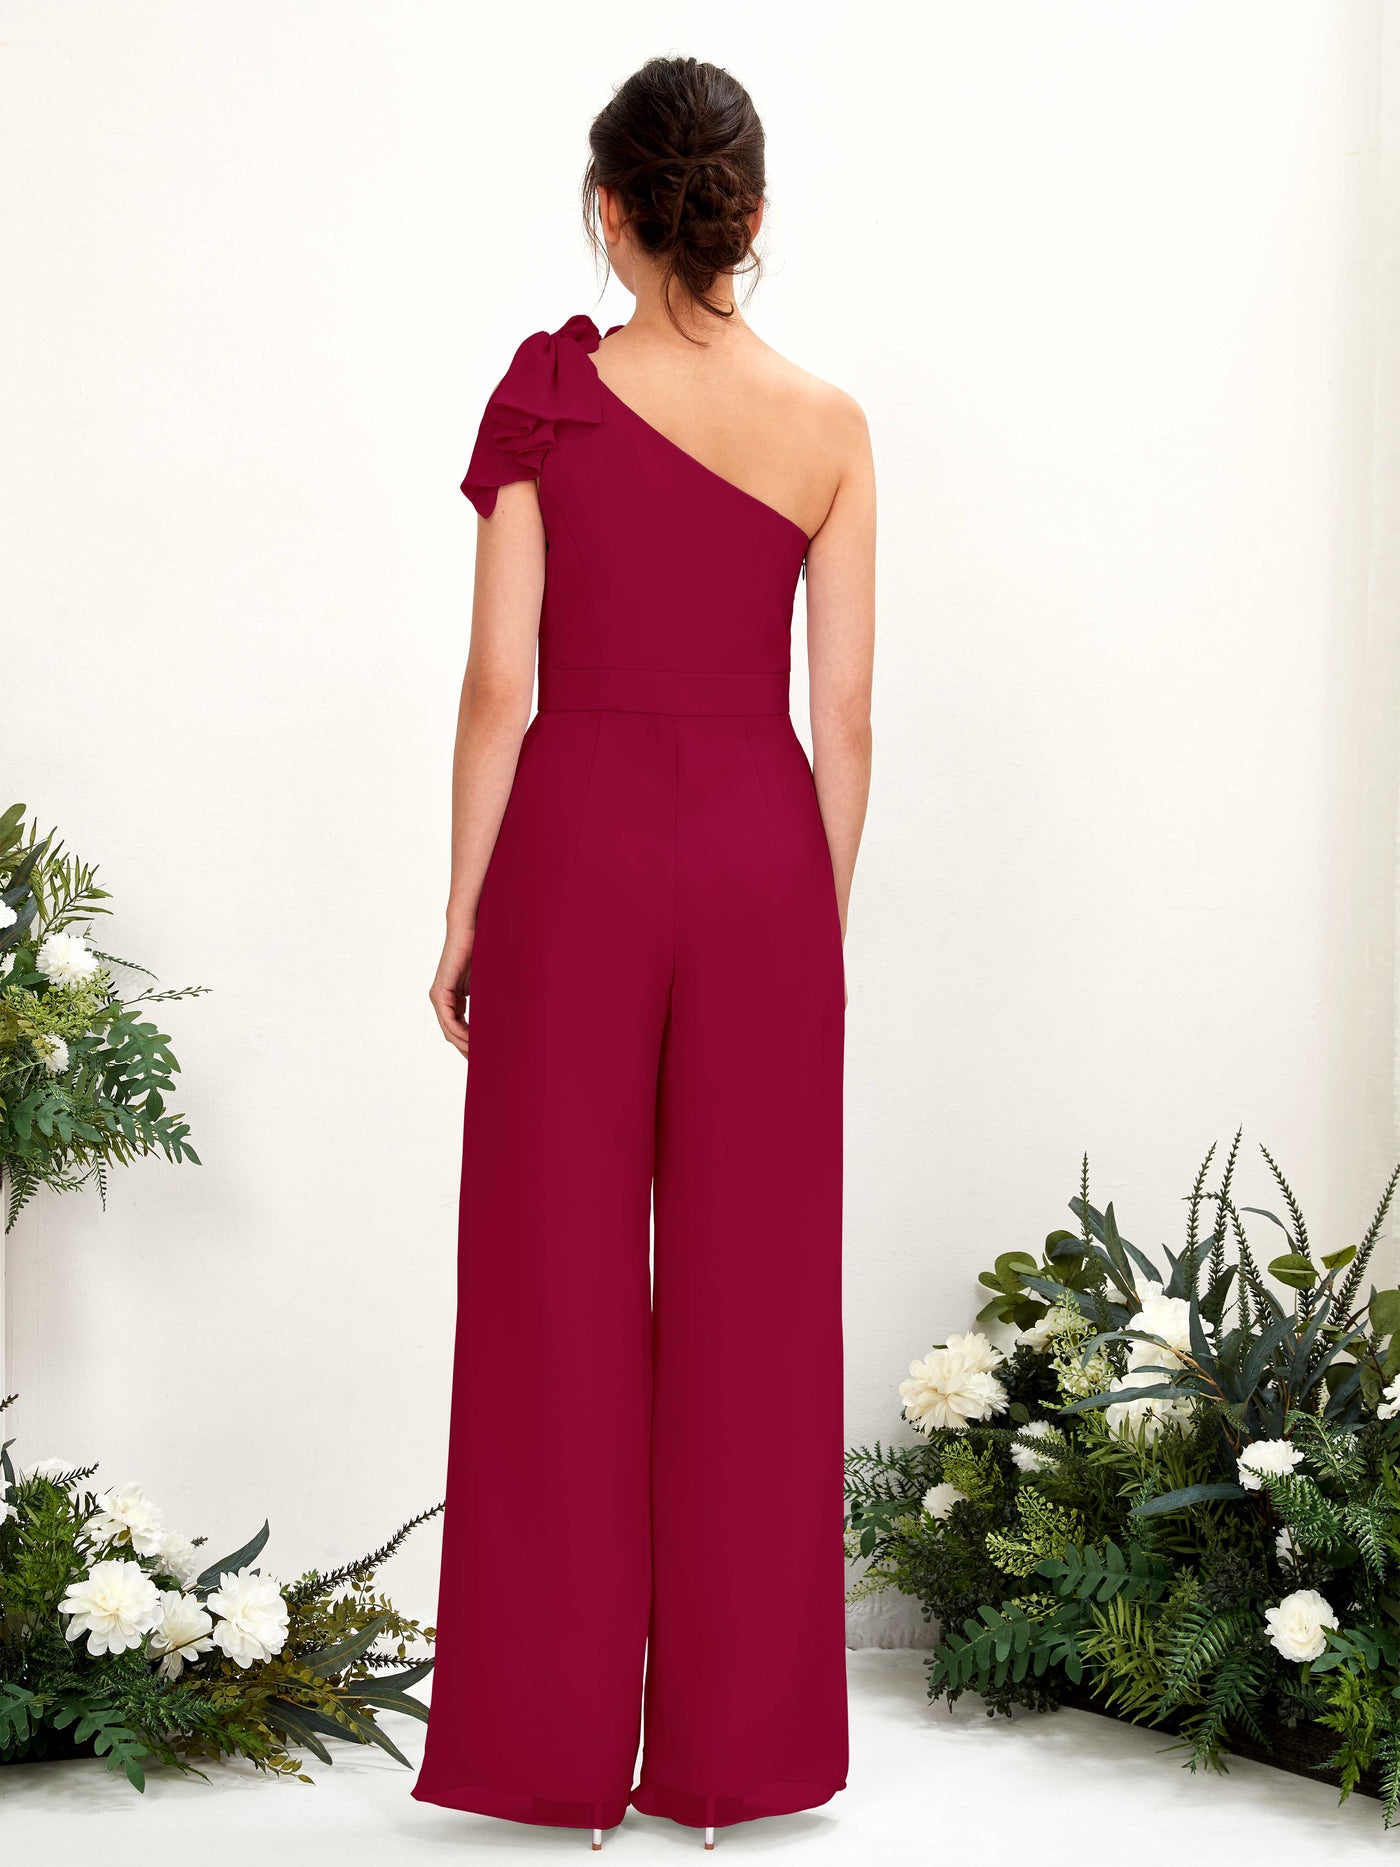 Jumpsuit/Pantsuit One-Shoulder Sleeveless Chiffon Long/Floor-Length Wedding Party  Dress - Wedding Party Dresses - Stacees